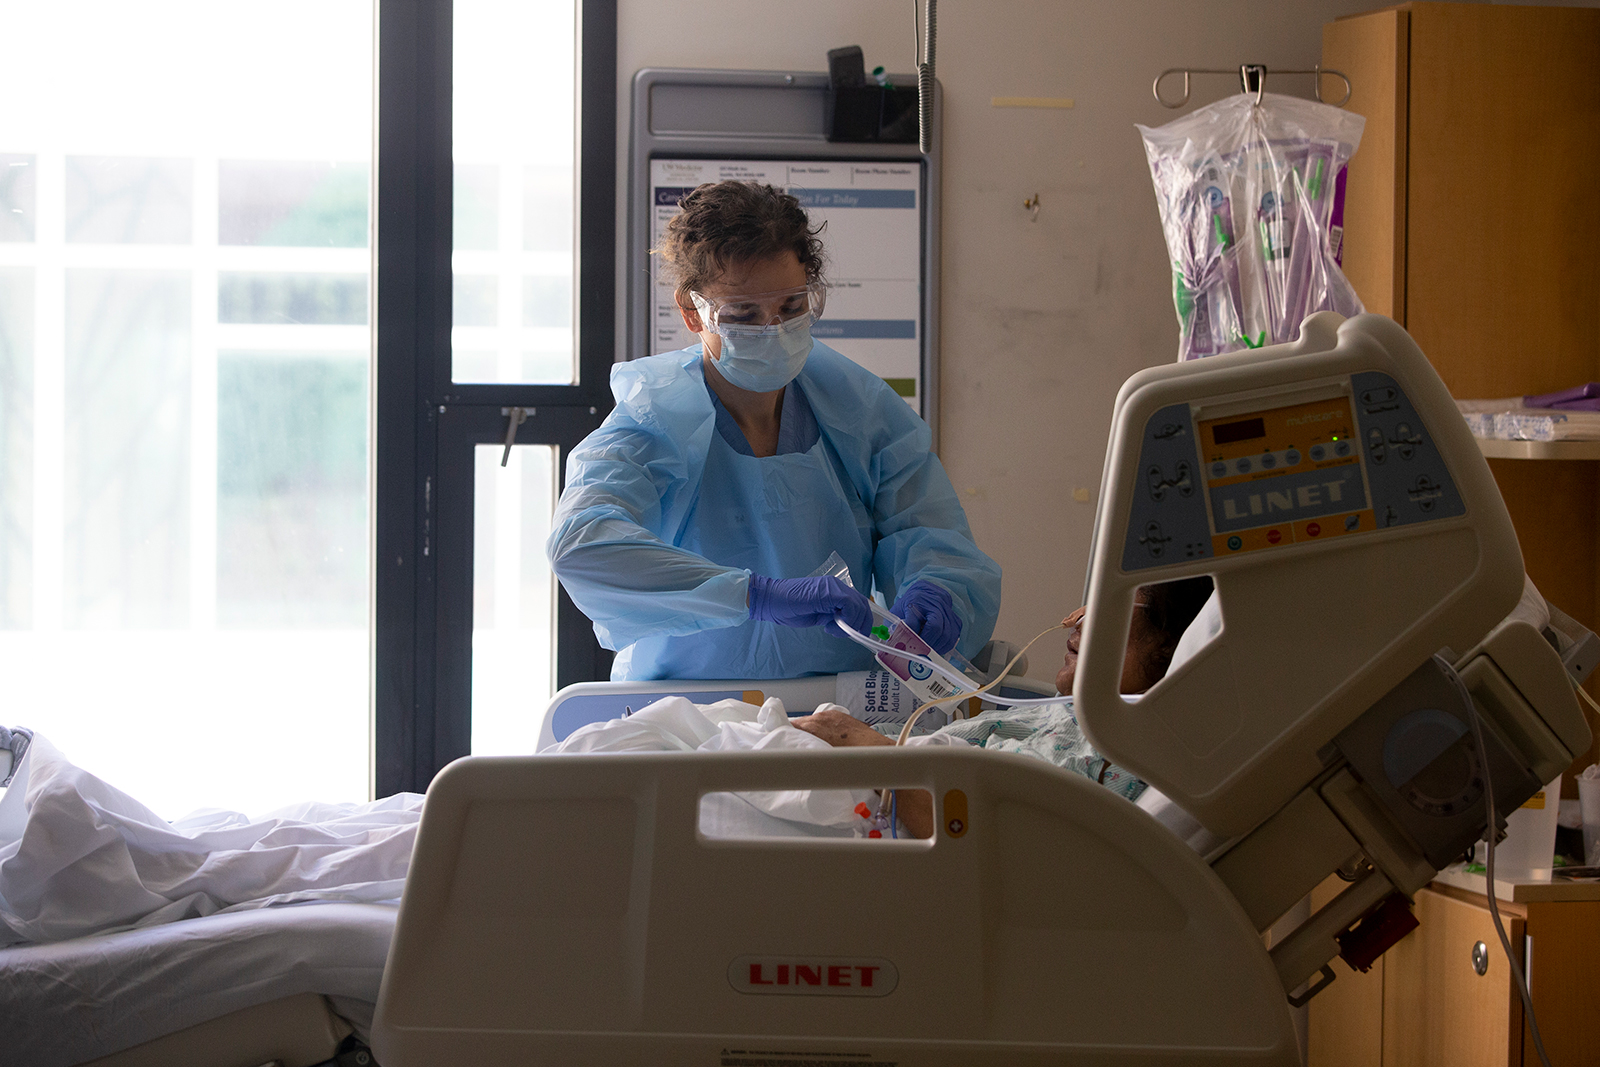 Nurse Karen Hayes administers care to a patient in the acute care Covid-19 unit at Harborview Medical Center on May 7, in Seattle, Washington.